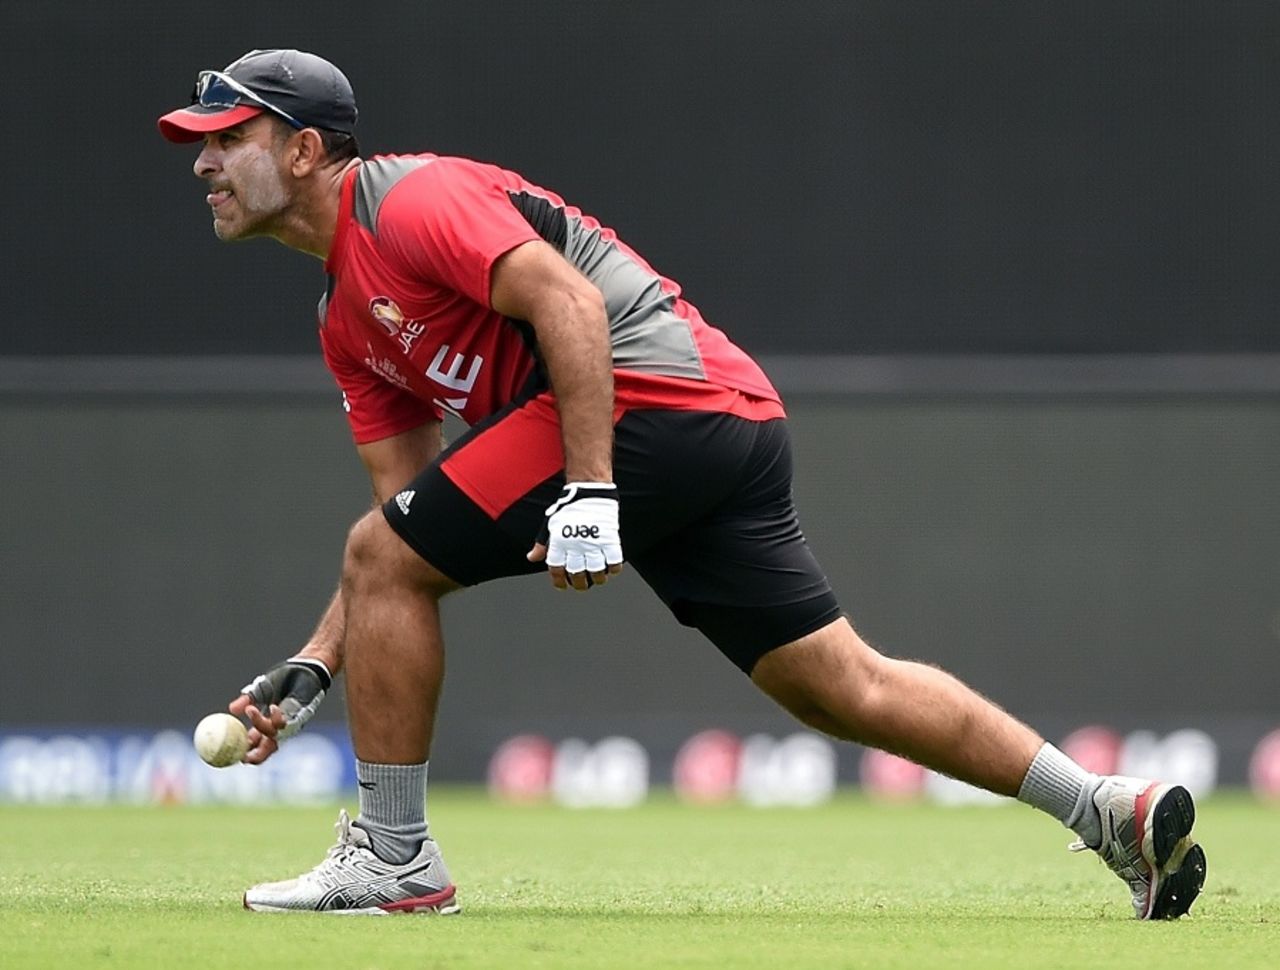 Mohammad Tauqir prepares to under-arm the ball during a training session, World Cup 2015, Brisbane, February 24, 2015